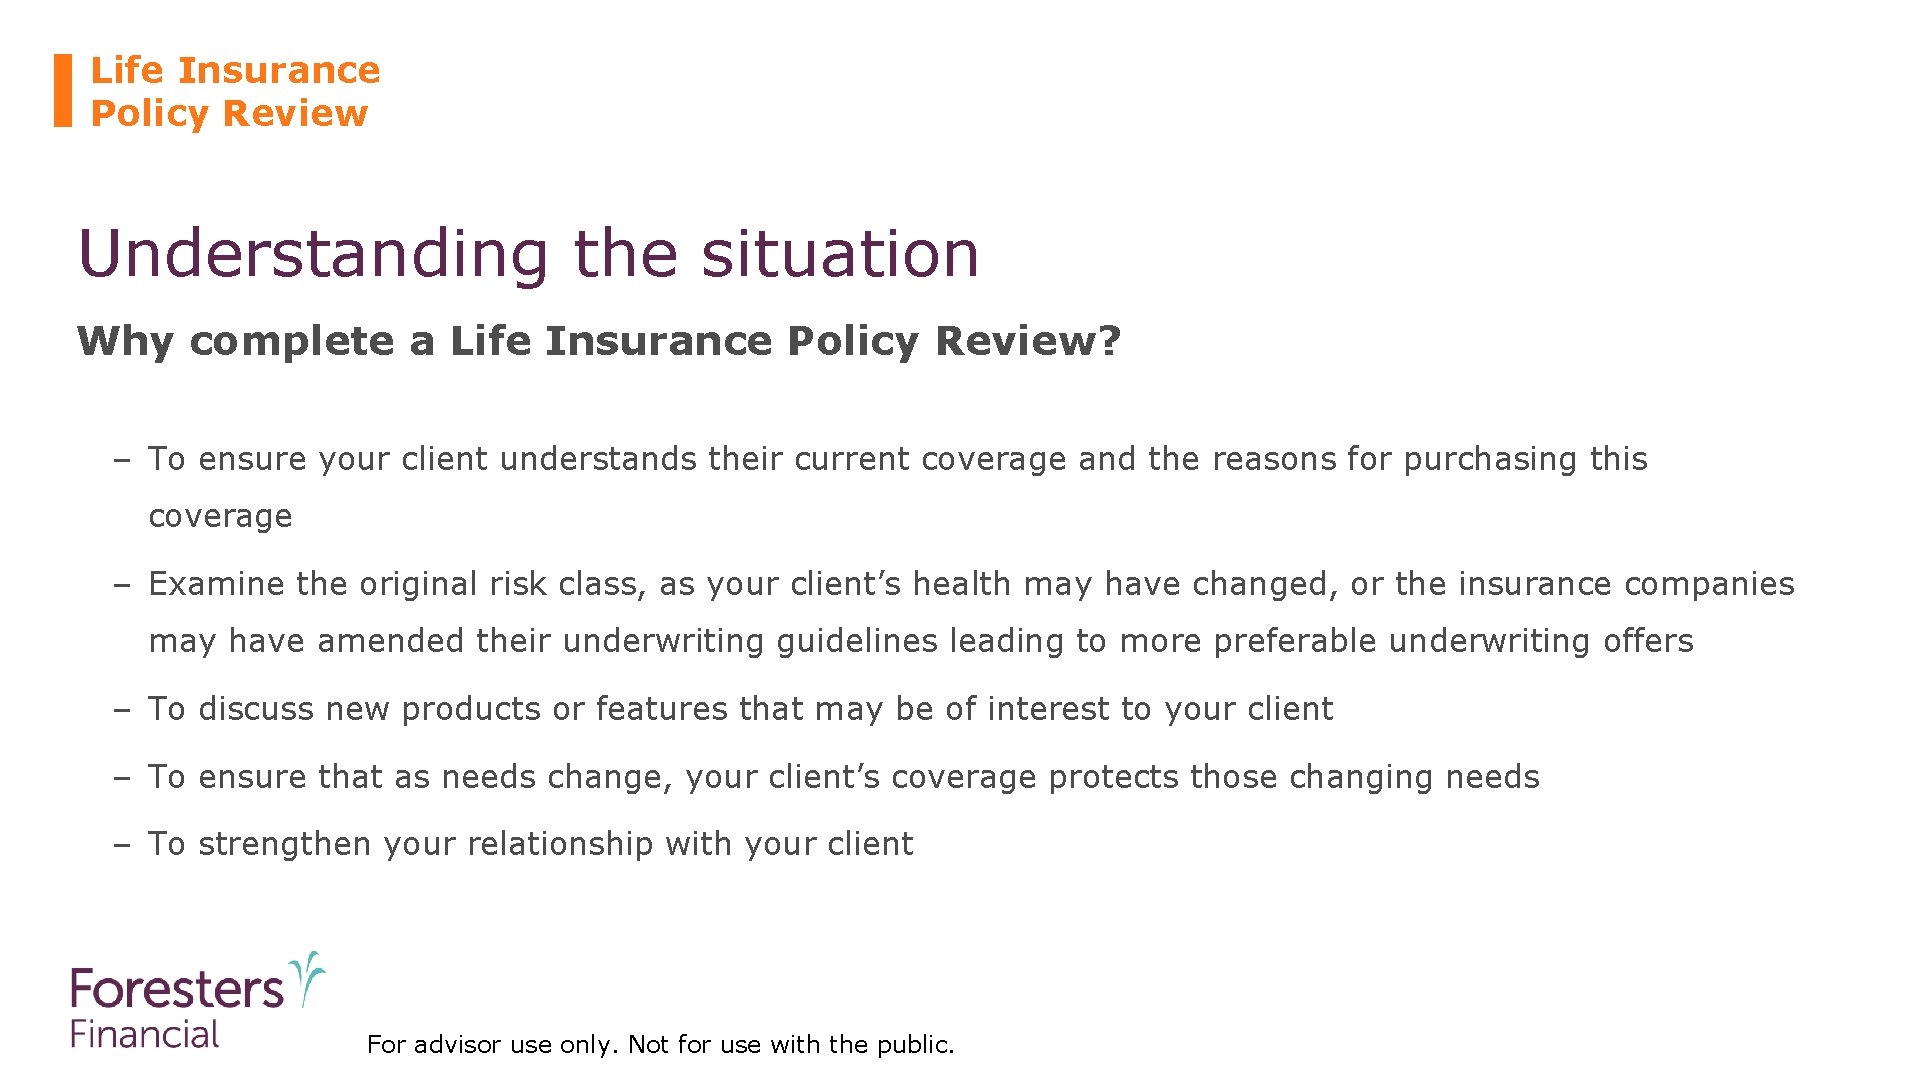 Life Insurance Policy Review Understanding the situation Why complete a Life Insurance Policy Review?